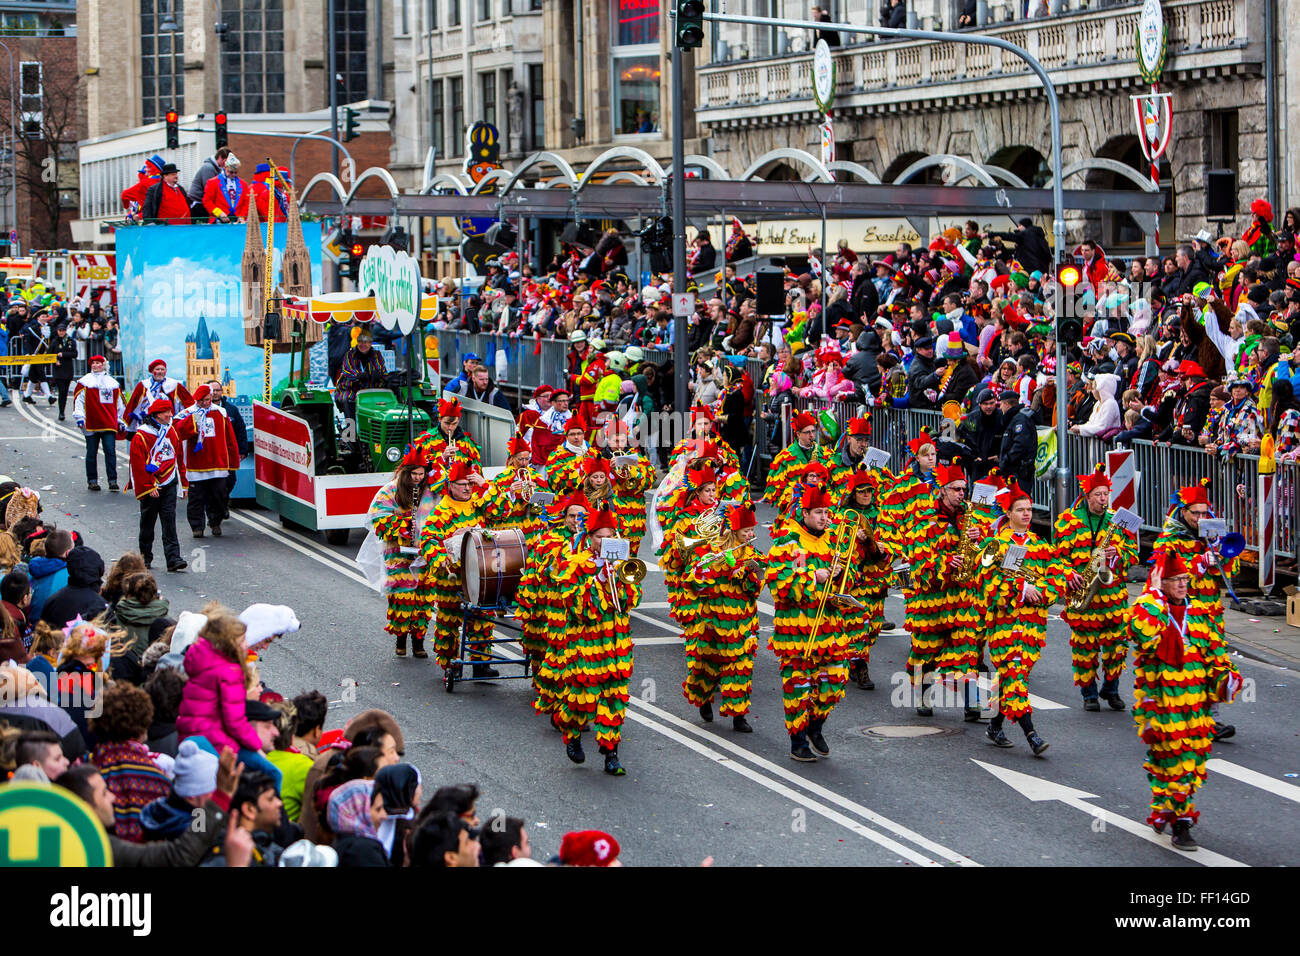 https://c8.alamy.com/comp/FF14GD/street-carnival-parade-and-party-in-cologne-germany-at-carnival-monday-FF14GD.jpg